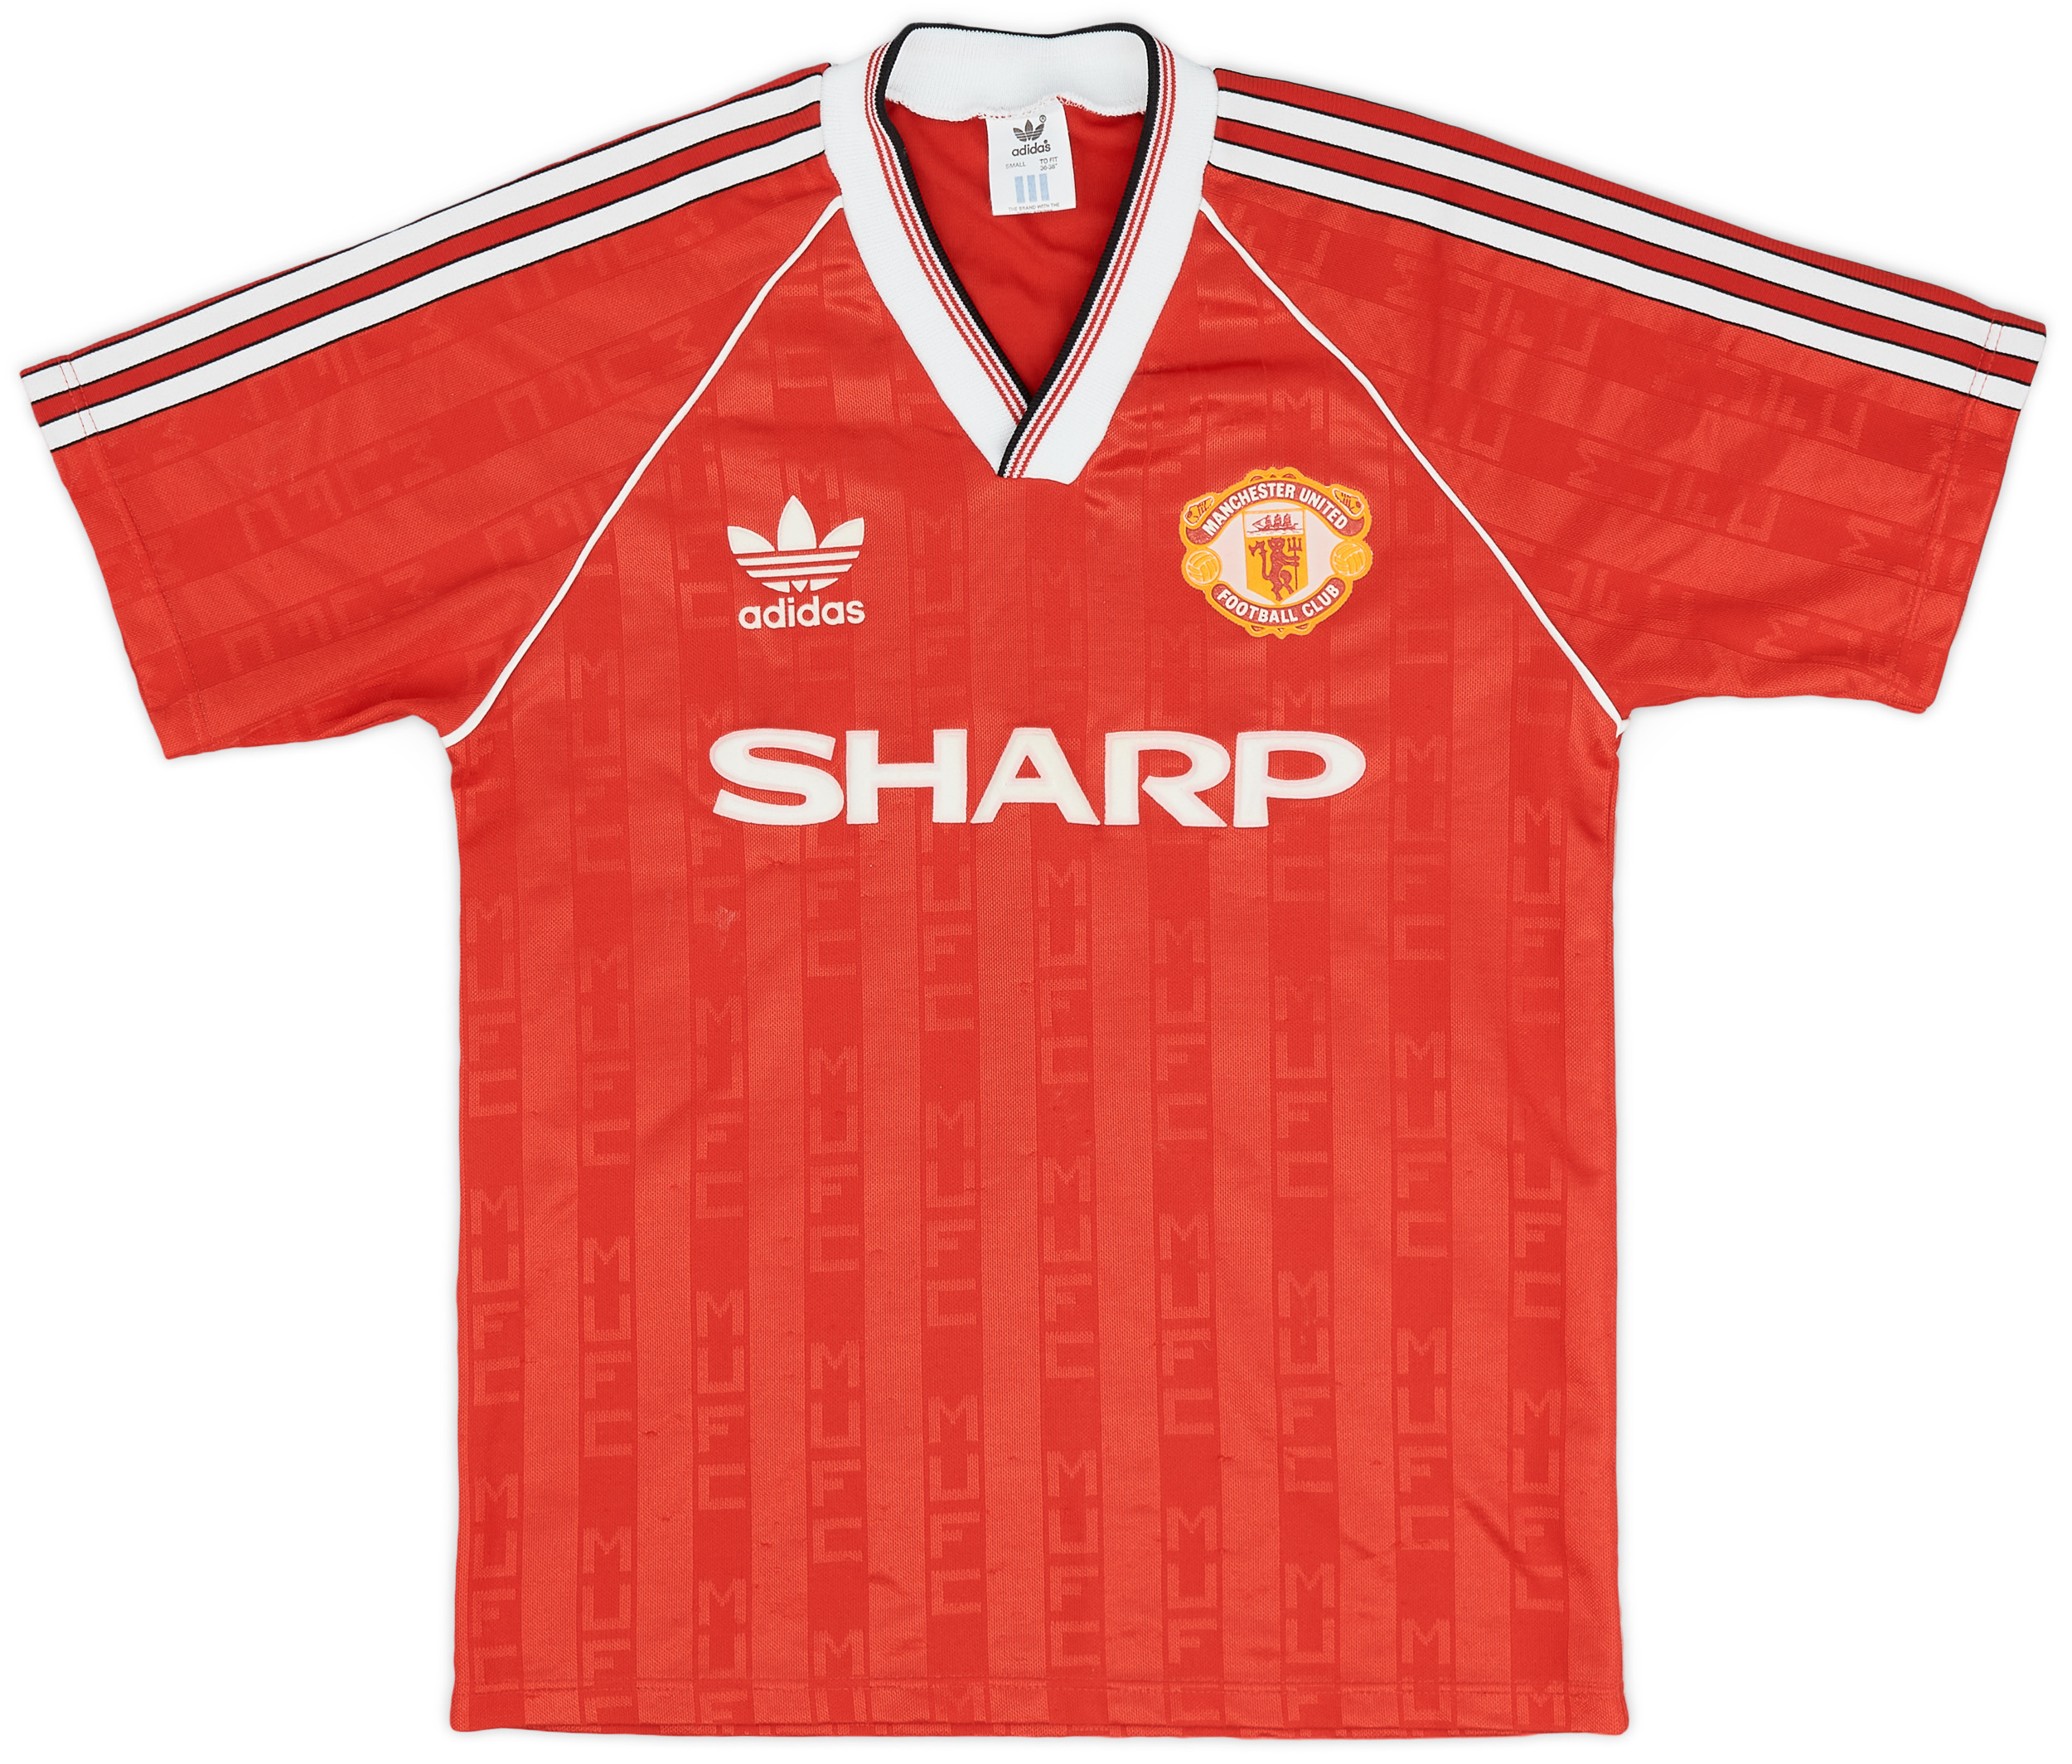 1988-90 Manchester United Home Shirt - 9/10 - ()